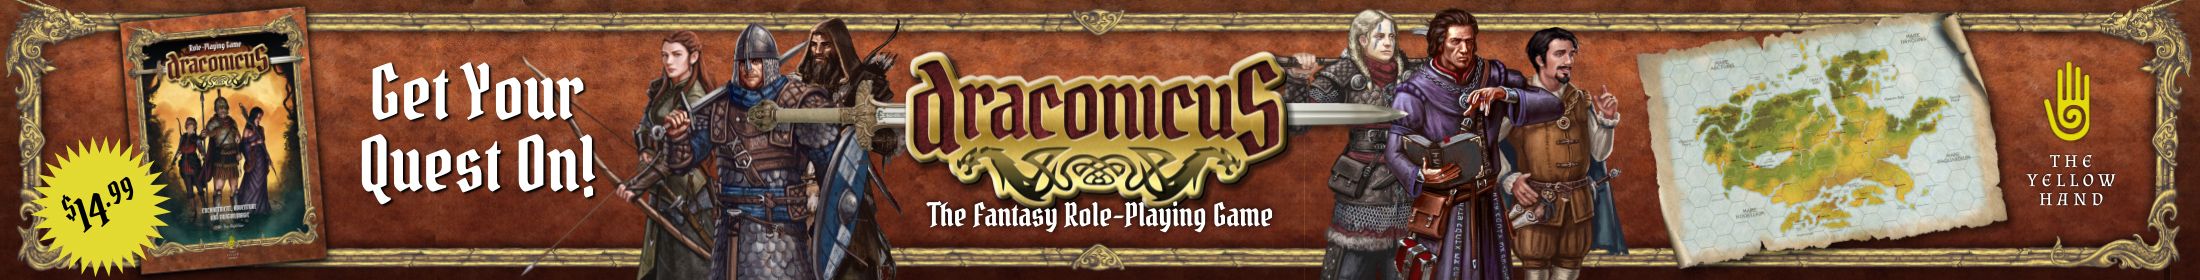 Draconicus - The Fantasy Role-Playing Game